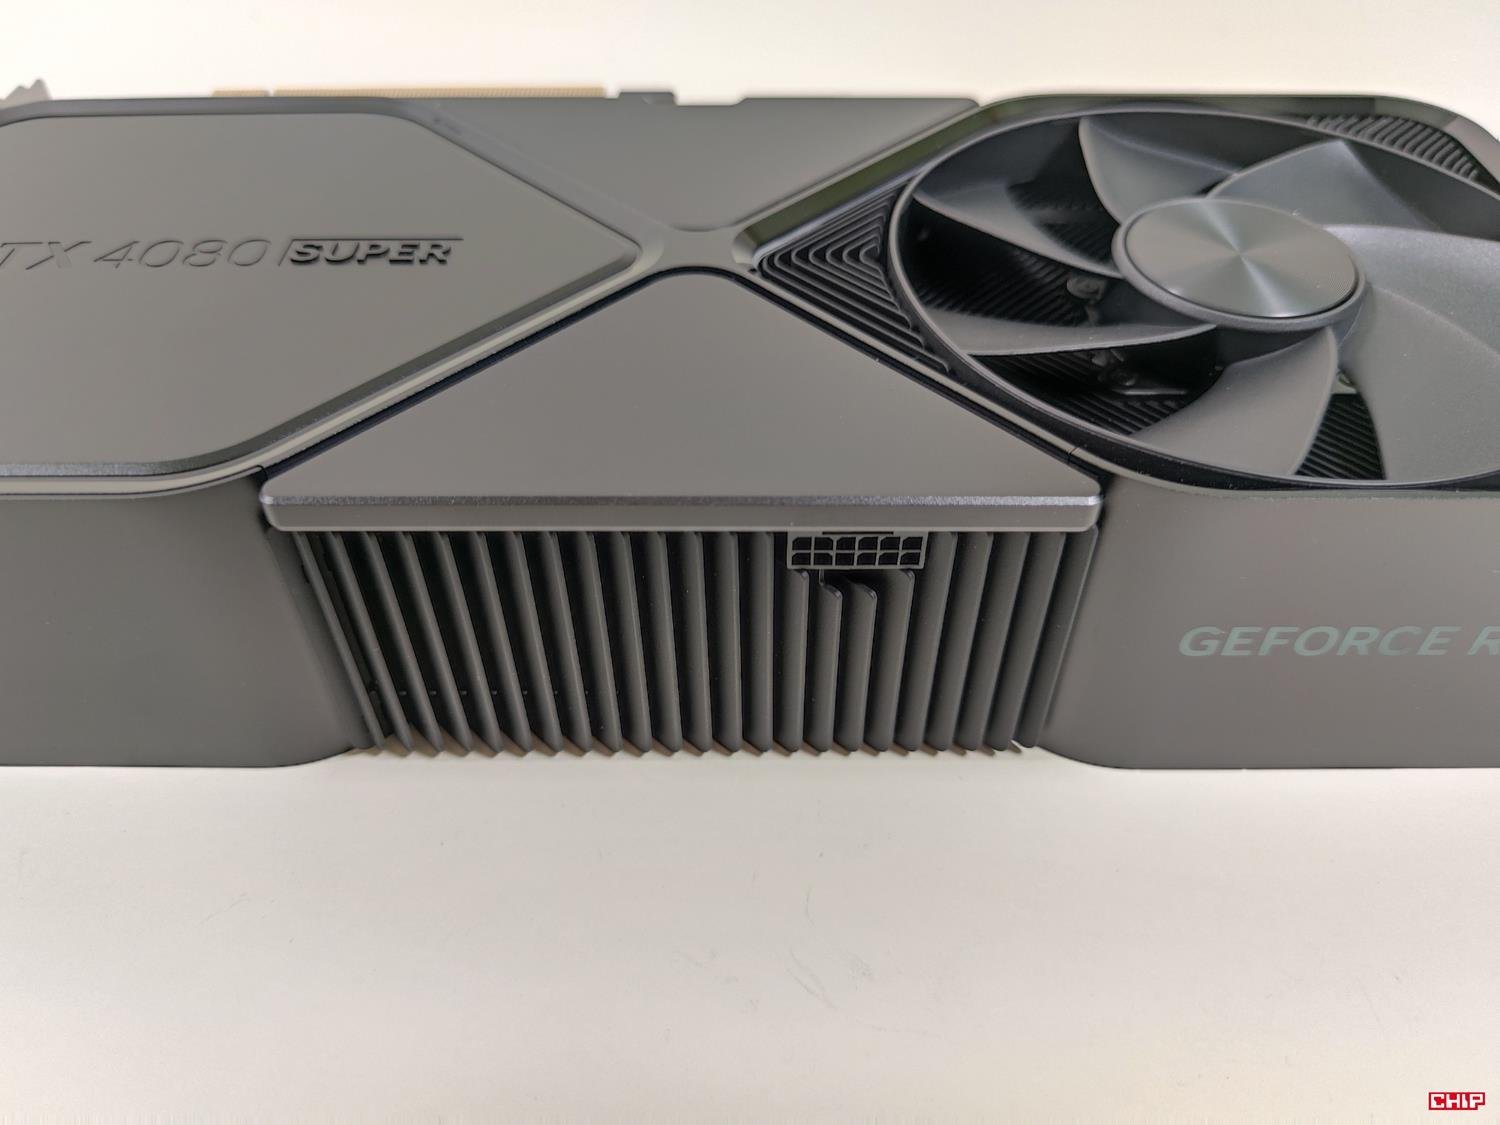 test Nvidia GeForce RTX 4080 SUPER Founders Edition, recenzja Nvidia GeForce RTX 4080 SUPER Founders Edition, opinia Nvidia GeForce RTX 4080 SUPER Founders Edition